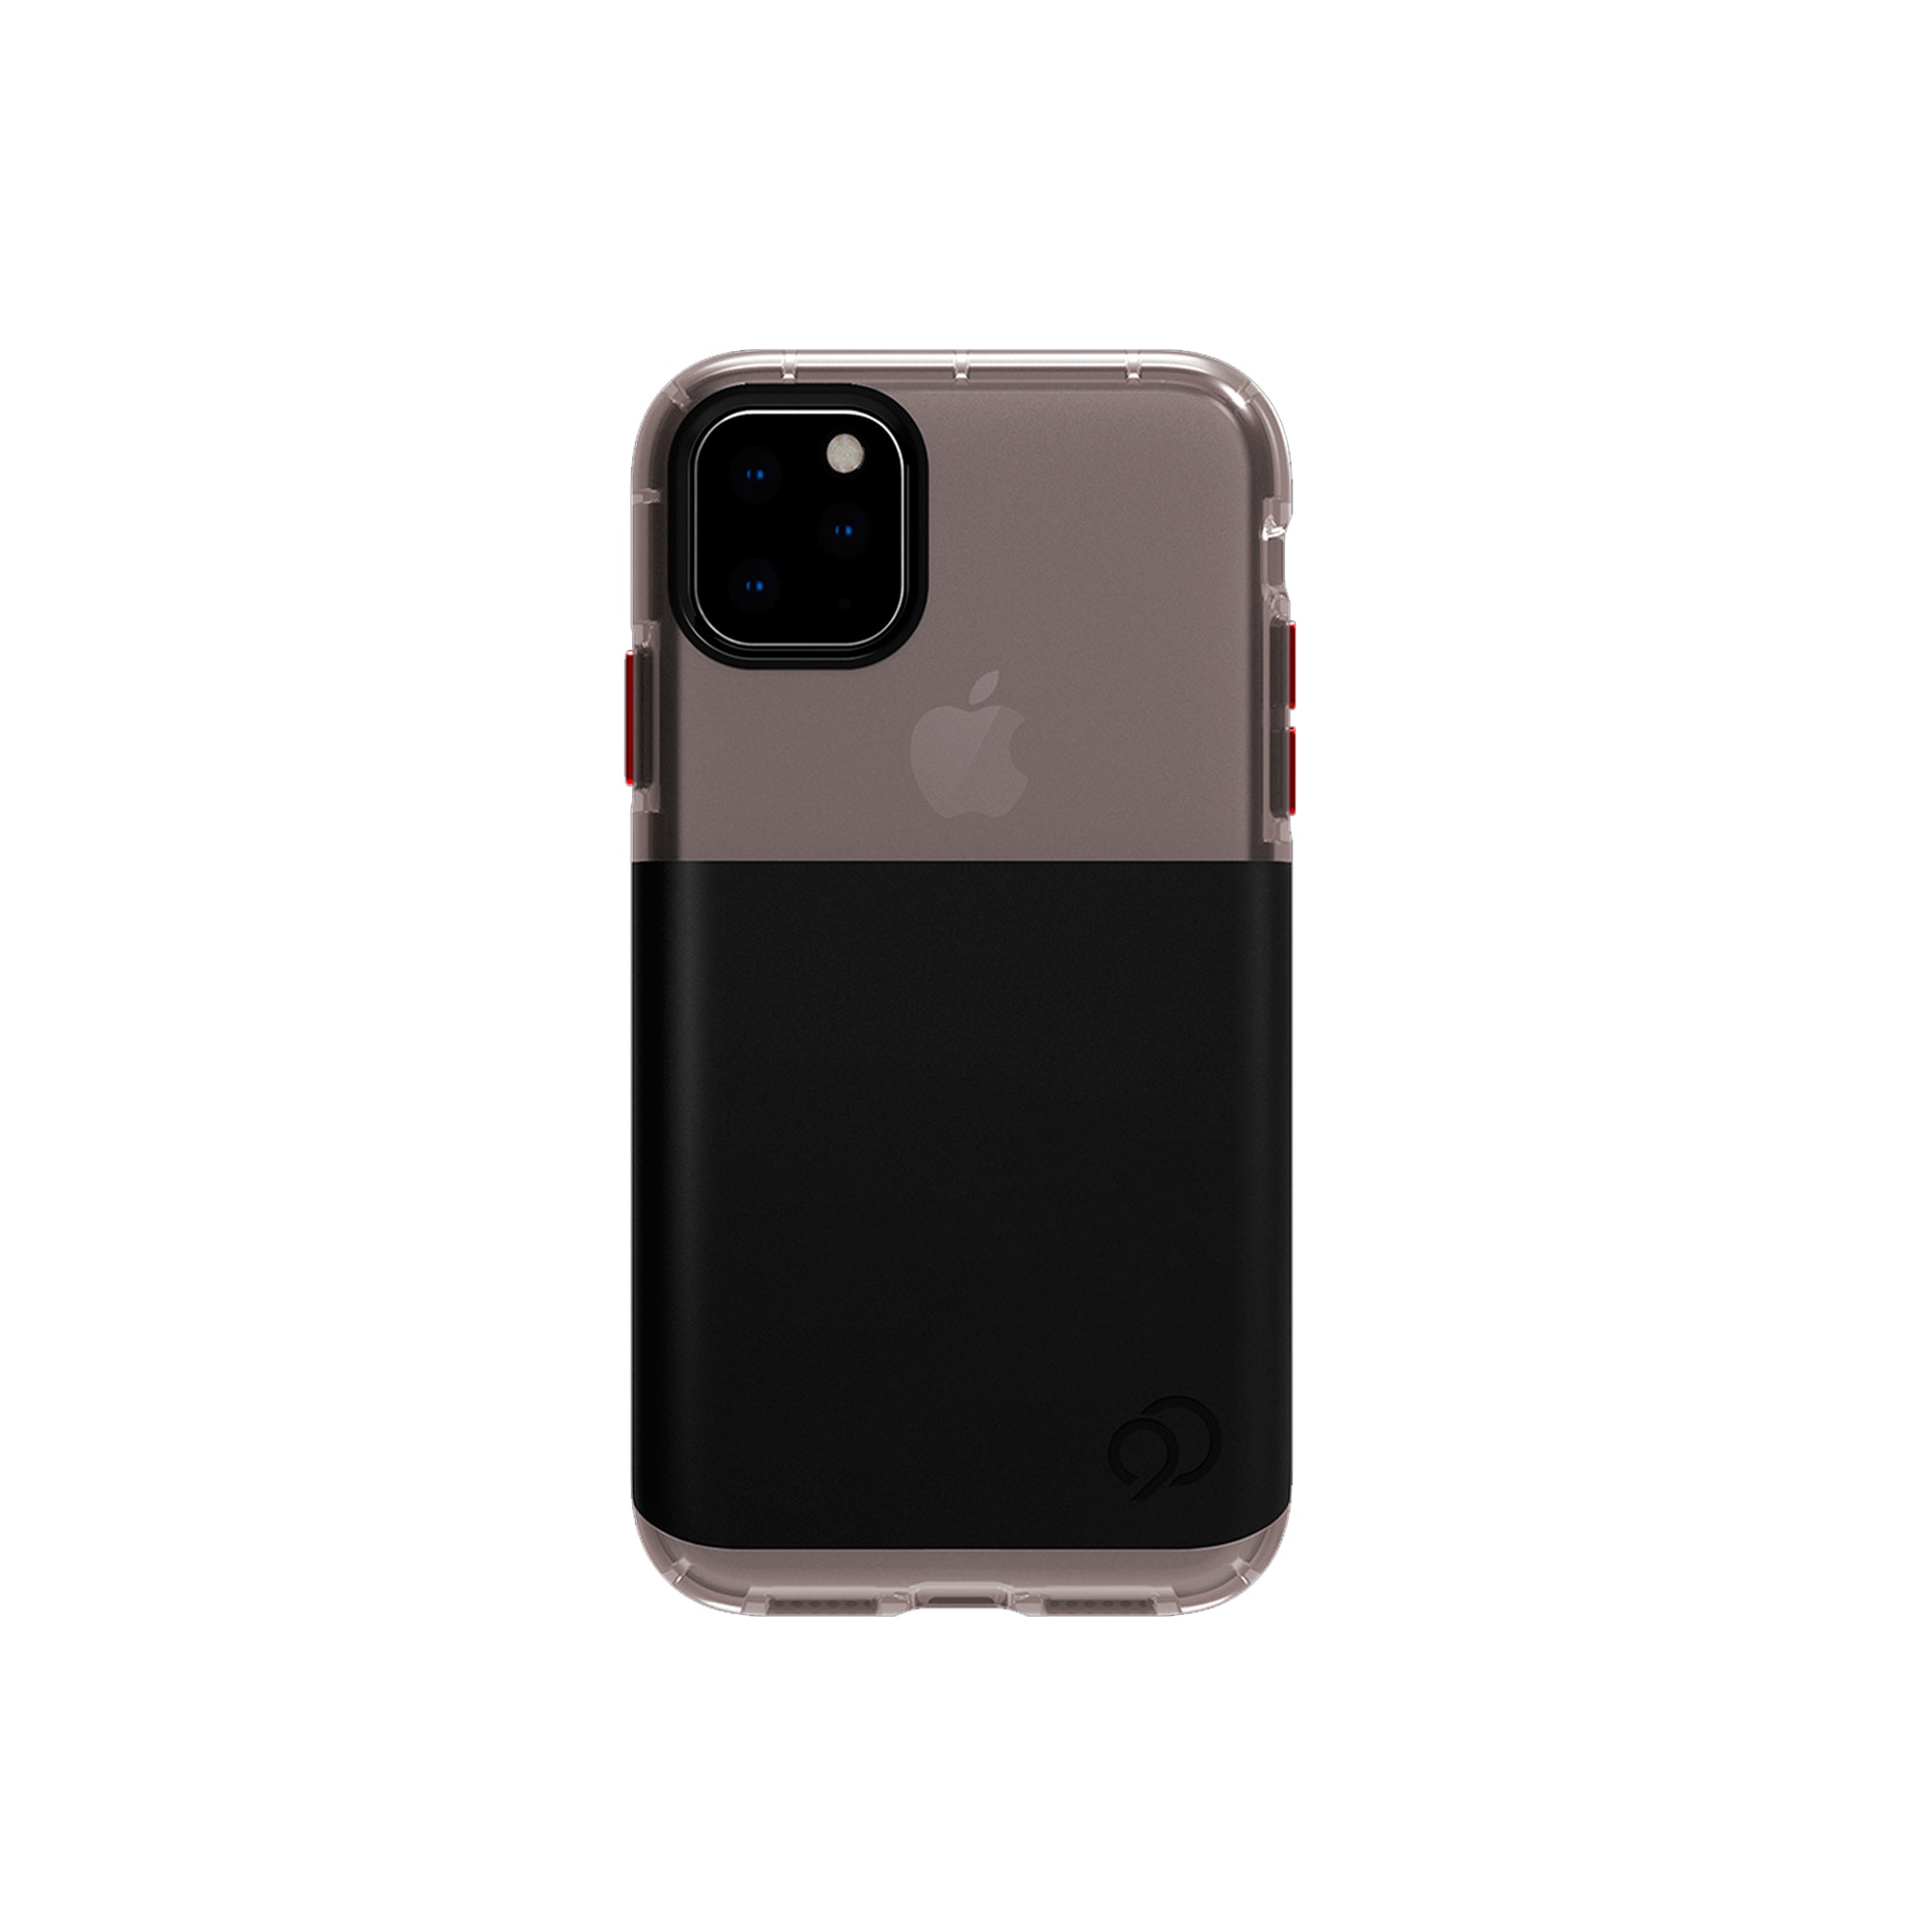 Nimbus9 - Ghost 2 Pro Case With Mount For Apple Iphone 11 Pro Max / Xs Max - Pitch Black And Crimson